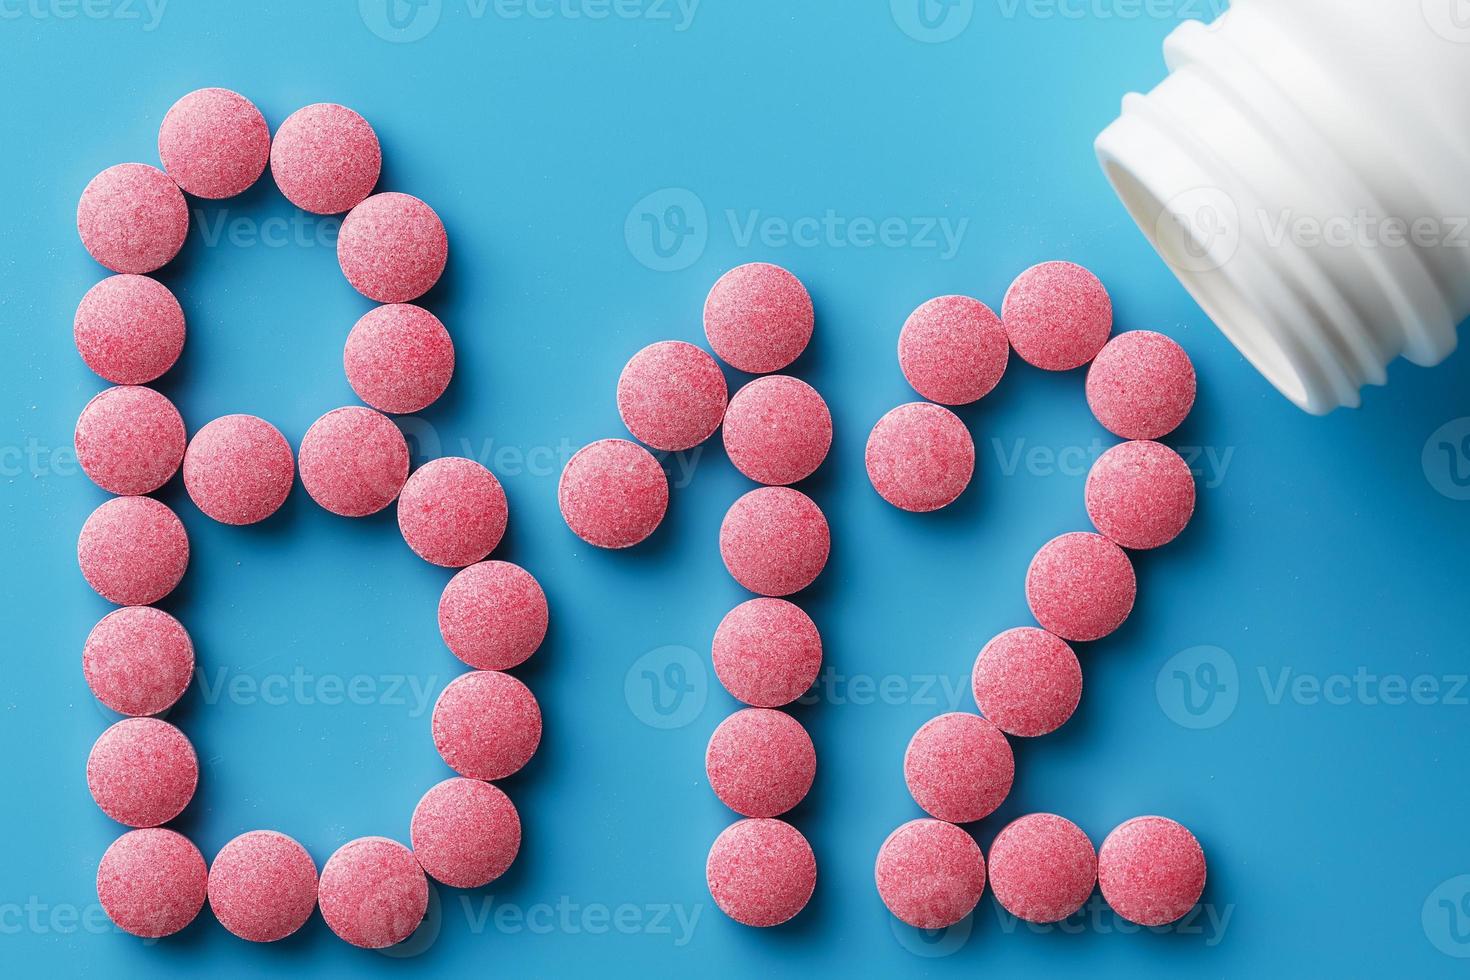 Pink pills in the shape of the letter B12 on a blue background, spilled out of a white can. photo